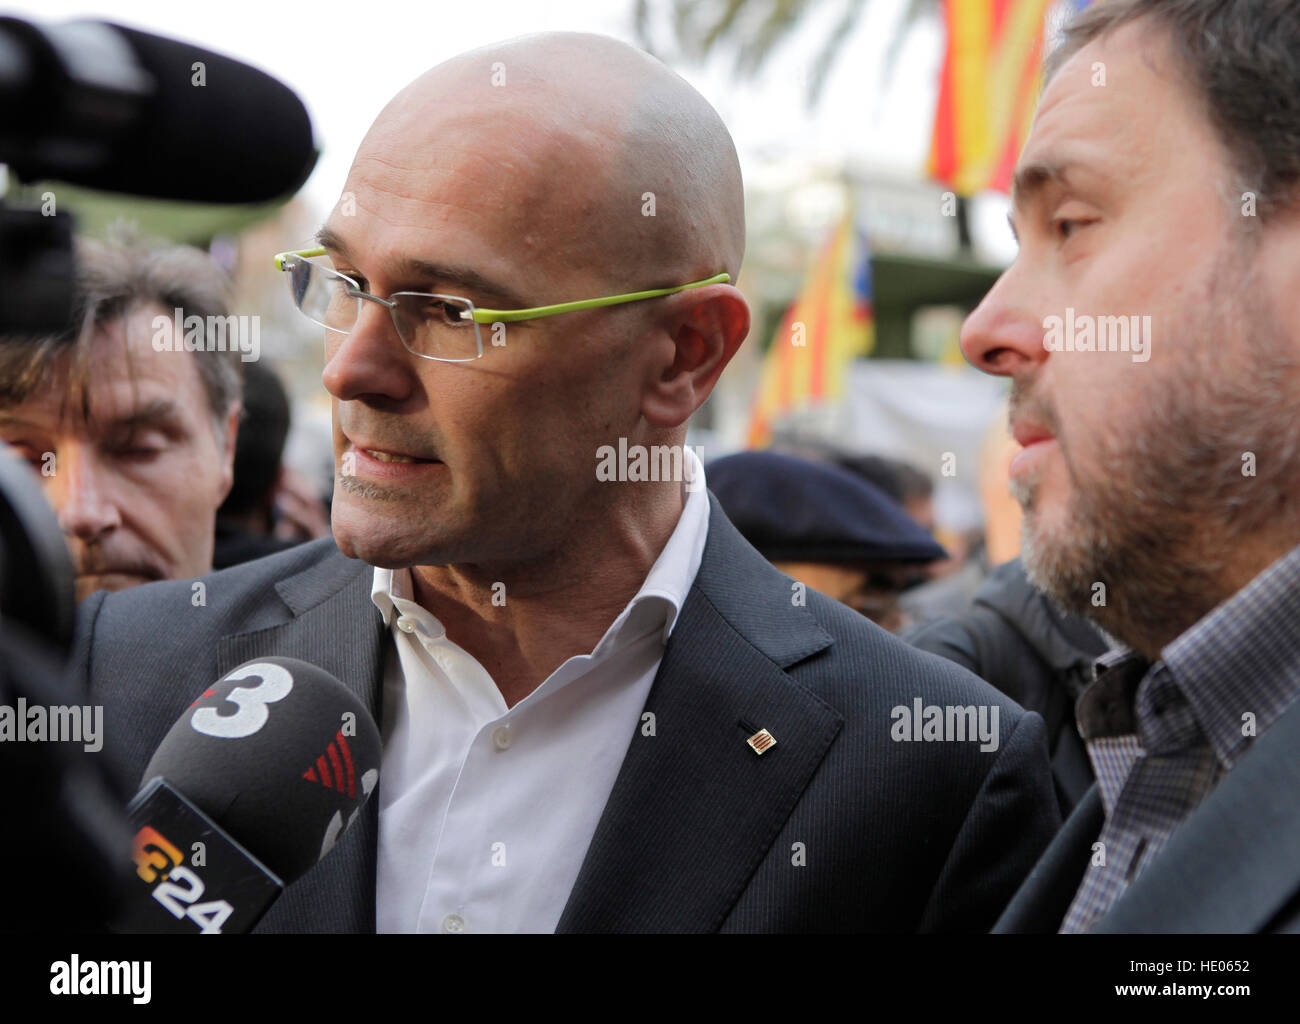 Barcelona, Catalonia, Spain. 16th Dec, 2016.      Raul Romeva and oriol junqueras speak to press. Catalan Members of Parliament and Mayors from the cities and towns of Catalonia demonstrate their support to the Parliament President, Carme Forcadell, before she goes into Court. Forcadell has been accused from Spanish Government to commit anti-constitutional acts, by approving the path to get the Referendum for Catalonia Independence.    © rich bowen/Alamy Live News Stock Photo